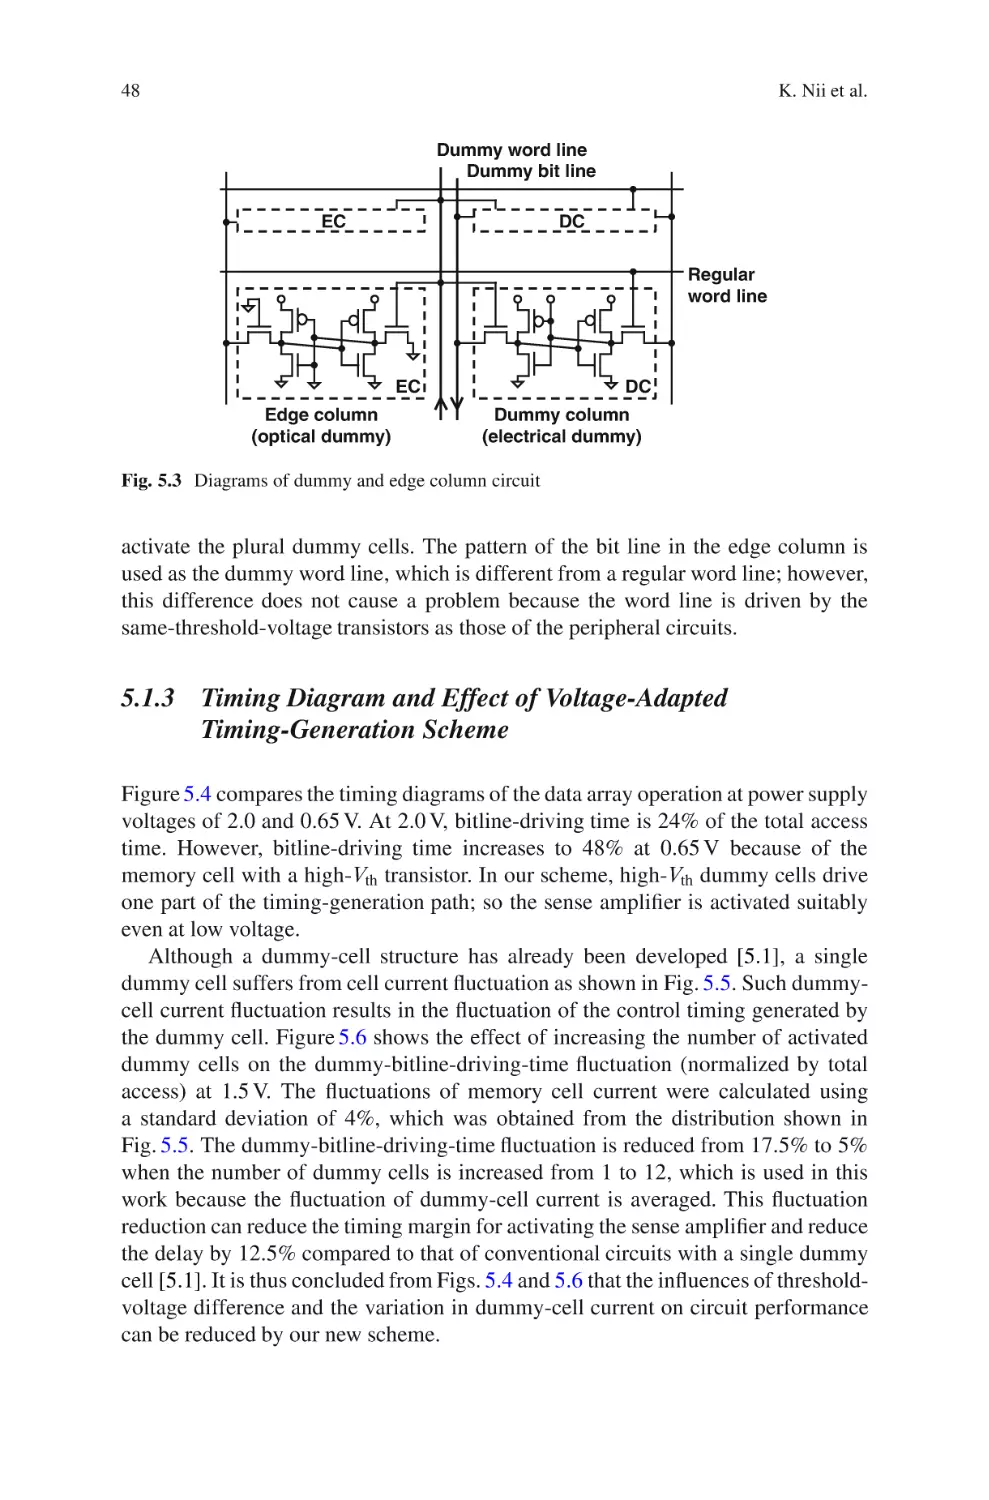 5.1.3 Timing Diagram and Effect of Voltage-Adapted Timing-Generation Scheme